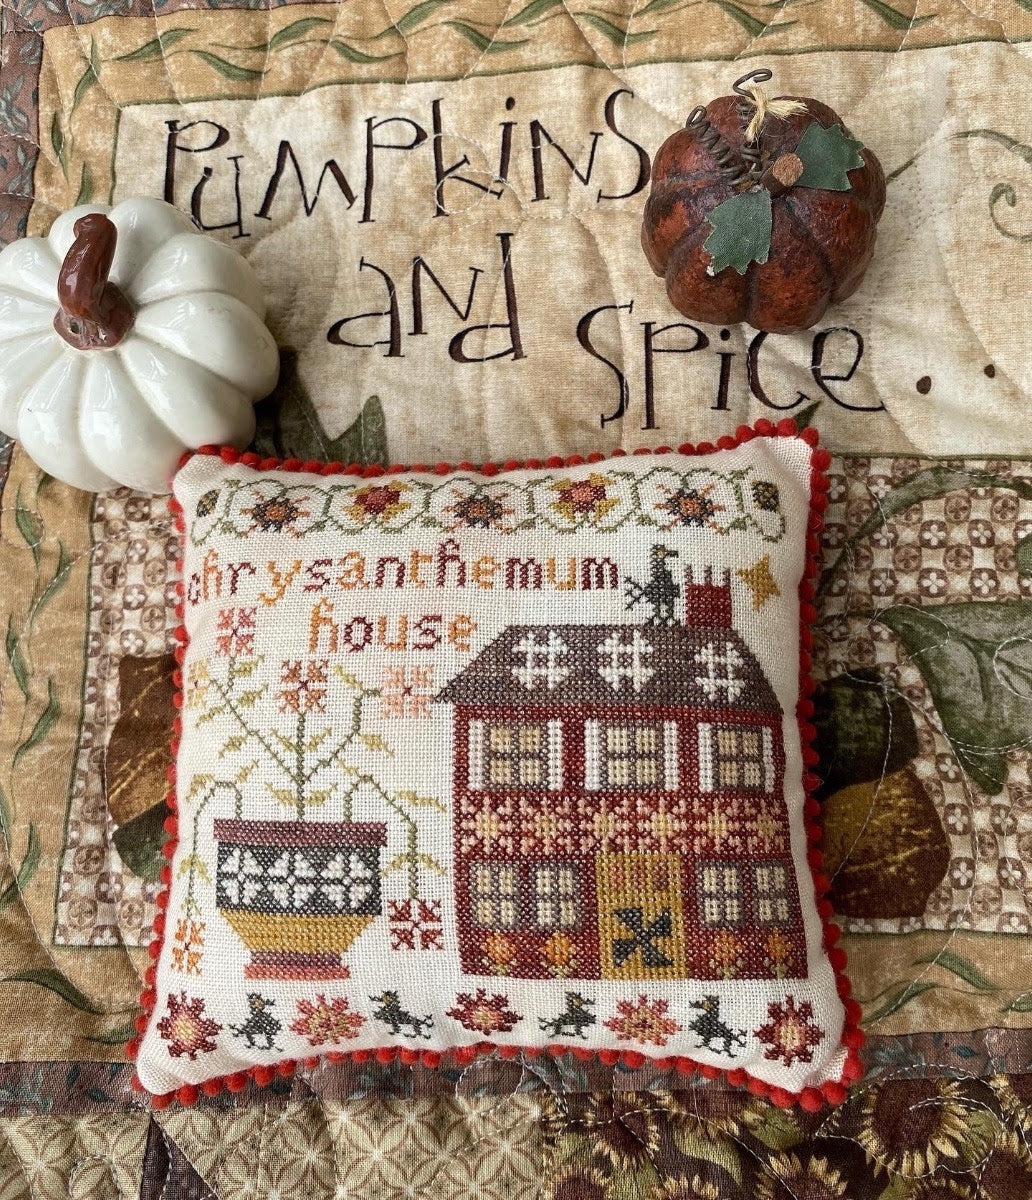 Chrysanthemum House by Pansy Patch Quilts & Stitchery